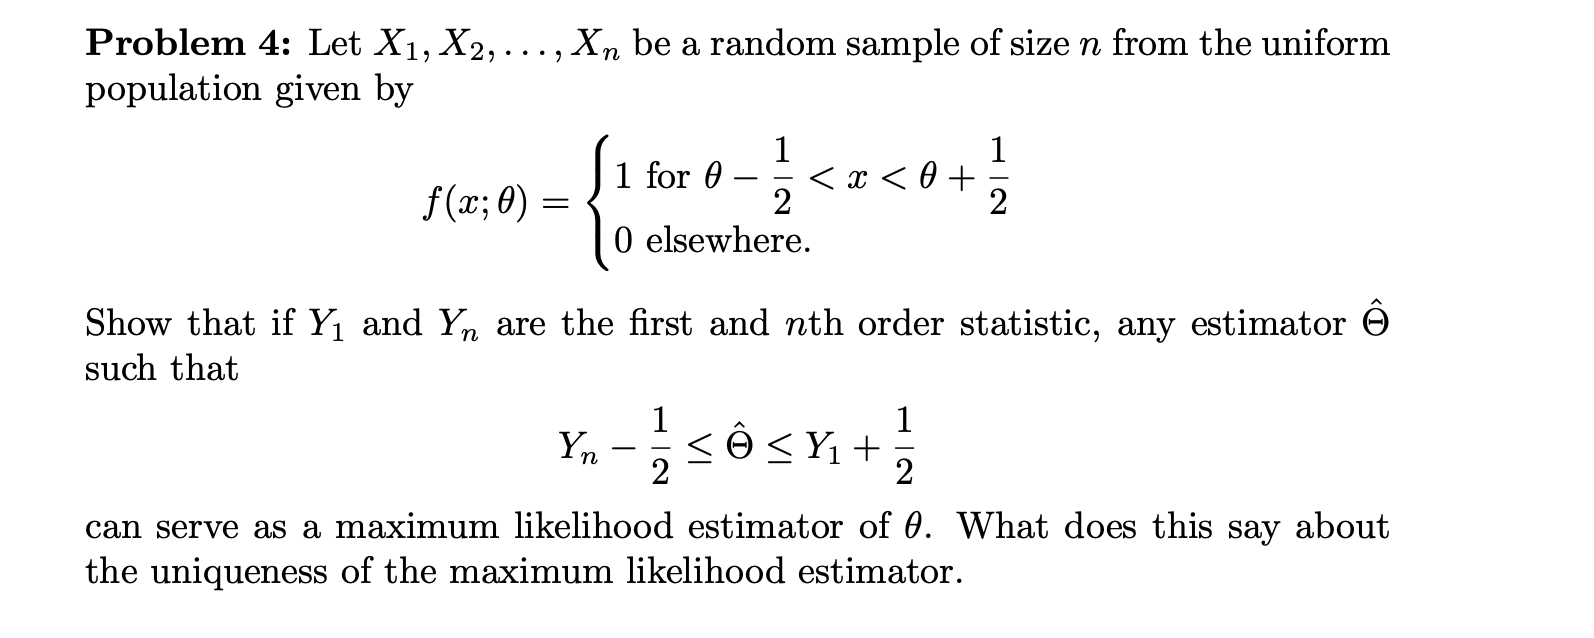 Problem 4: Let X1, X2,..., Xn be a random sample of size n from the uniform
population given by
1
1 for 0
2
0 elsewhere.
1
f(x;0)
Show that if Y1 and Yn are the first and nth order statistic, any estimator
such that
1
1
n
2
2
can serve as a maximum likelihood estimator of 0. What does this say
the uniqueness of the maximum likelihood estimator
about
